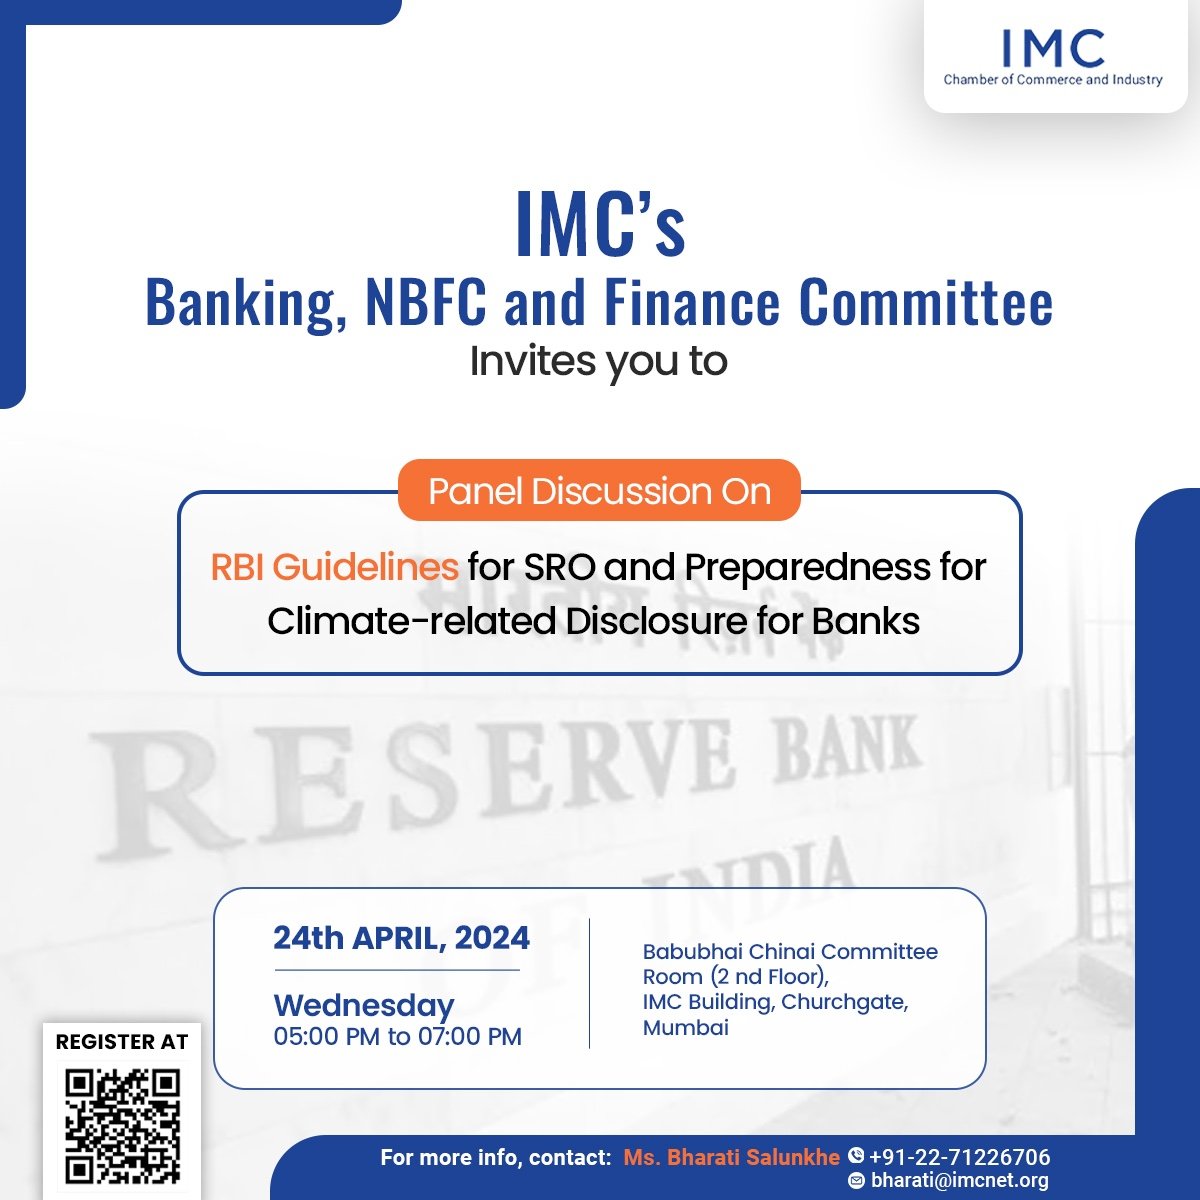 Join us for an insightful panel discussion on @RBI Guidelines for SRO and Preparedness for Climate-related Disclosure for Banks, hosted by IMC's Banking, NBFC, and Finance Committee. 📅 April 24, 2024 ⏰ 5:00 PM - 7:00 PM 🏢 IMC Building, Mumbai. Dive deep into crucial